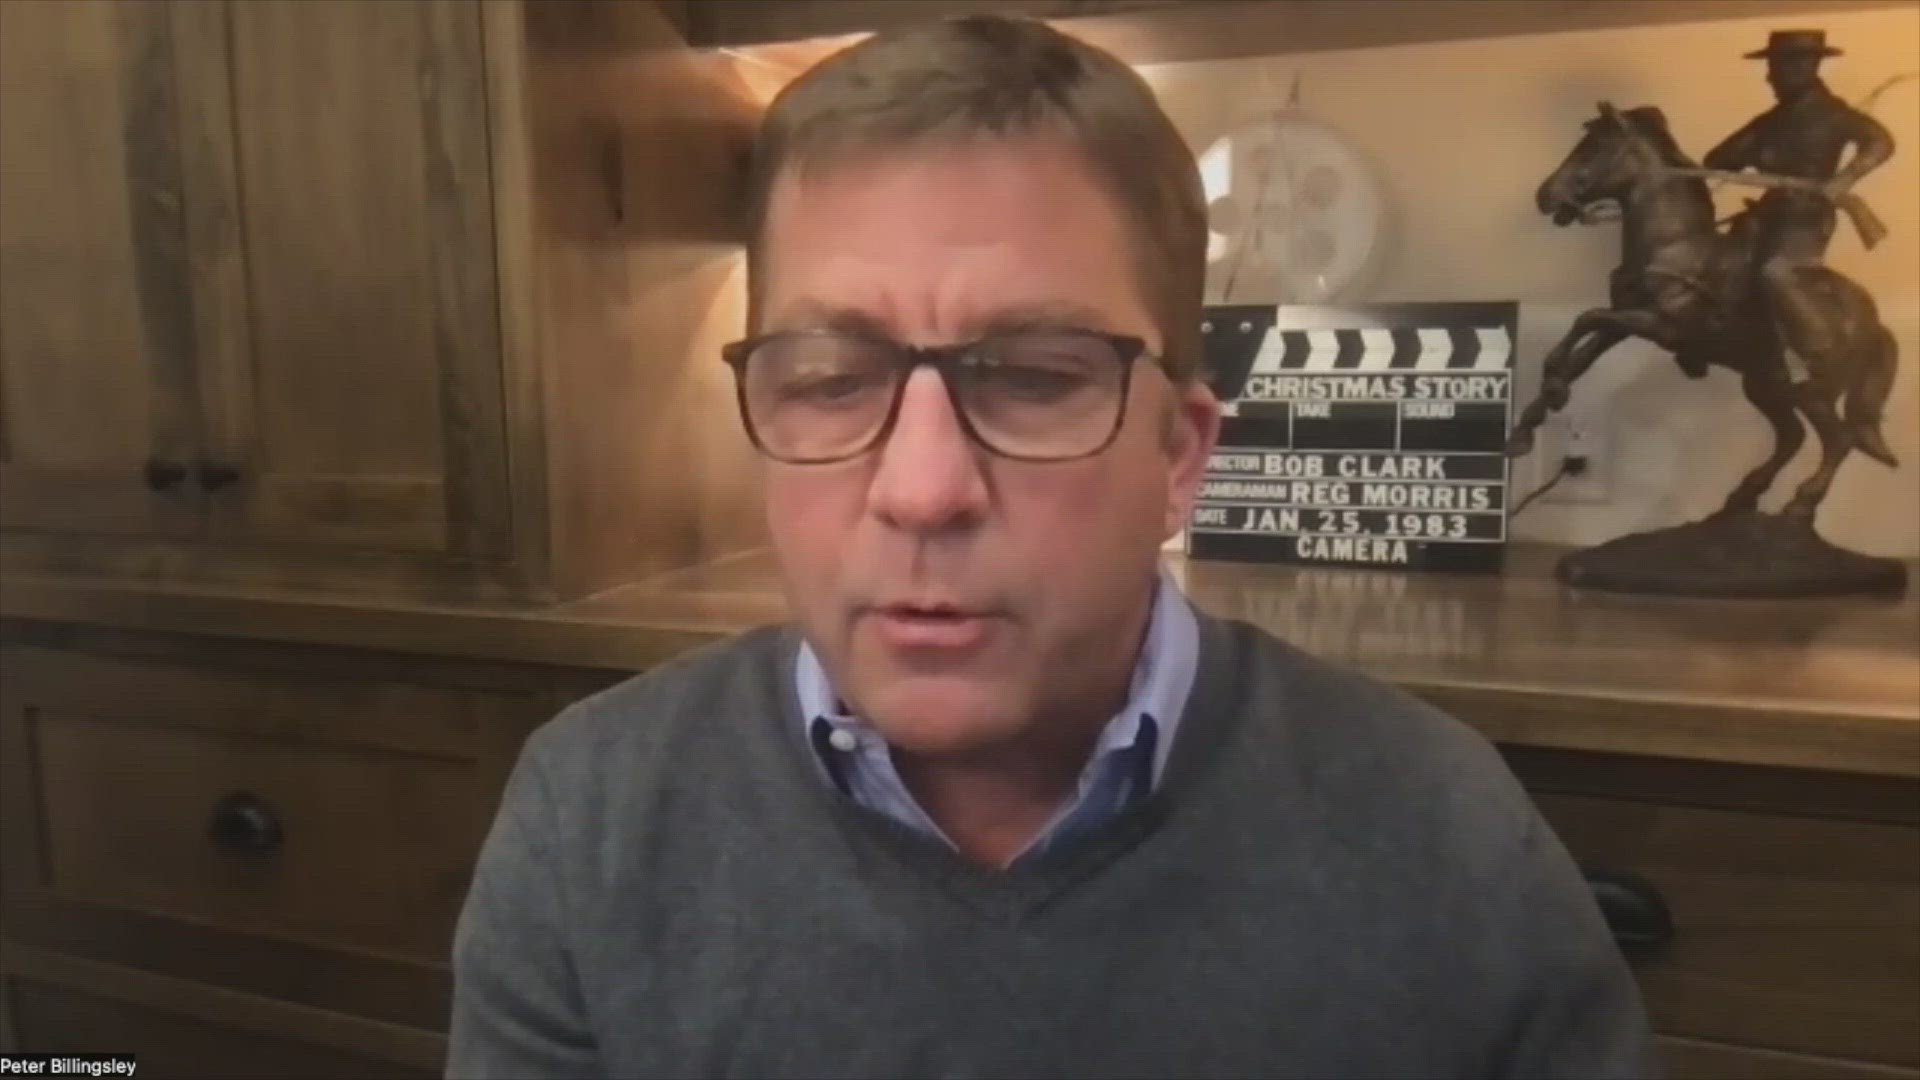 Peter Billingsley, who played Ralphie, will be joining much of the cast for the celebration in Cleveland next month.